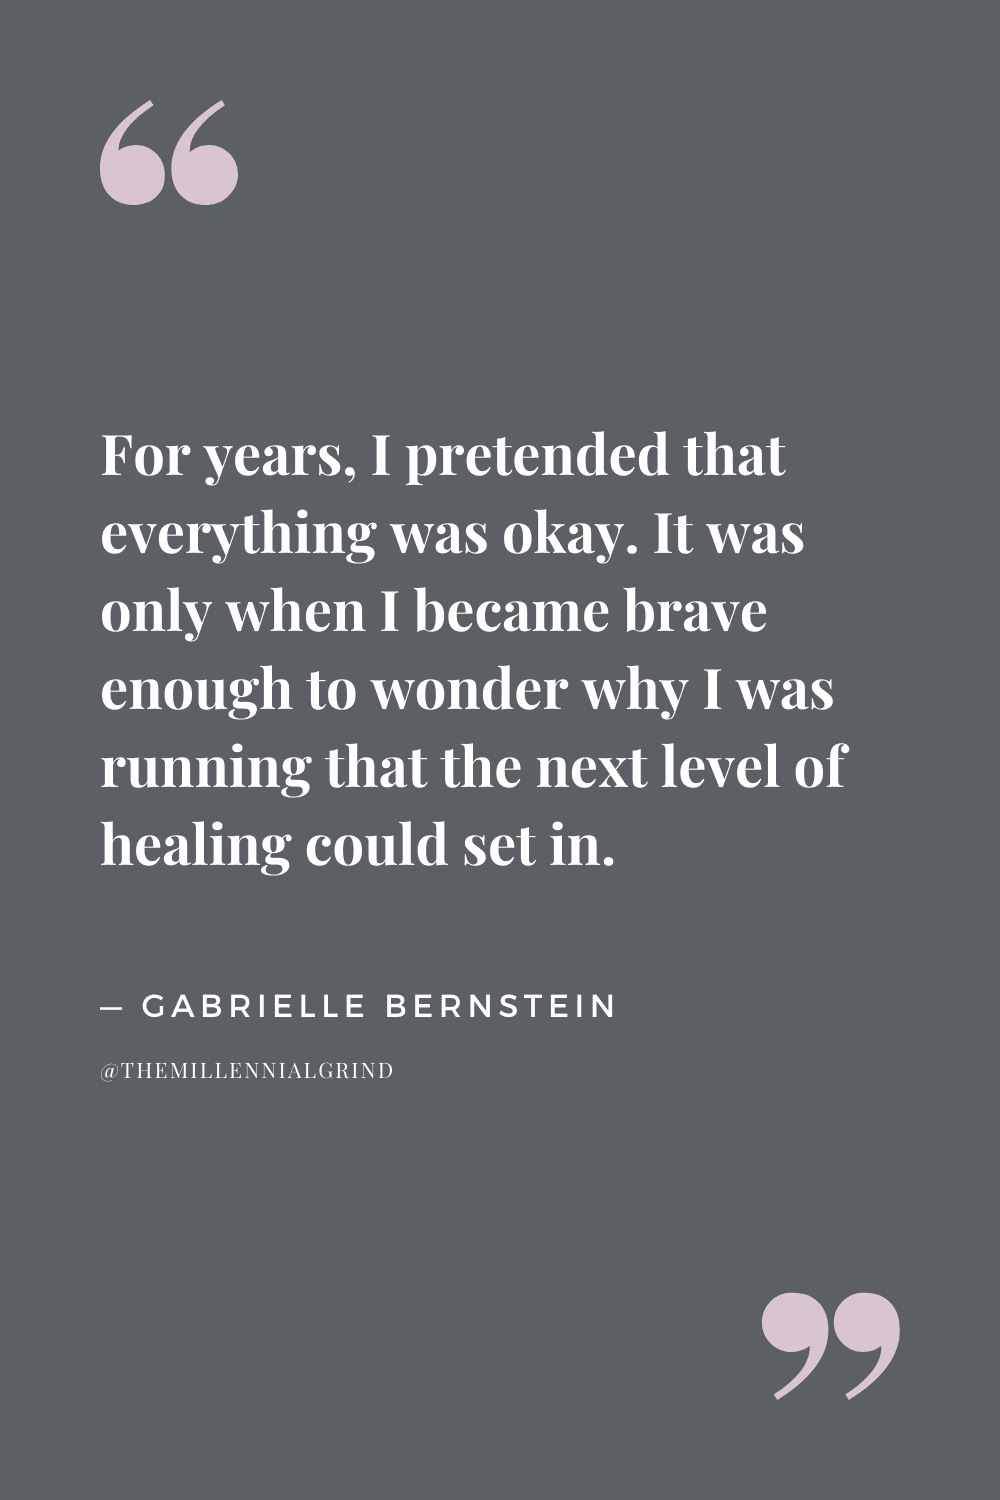 Quotes from Happy Days by Gabrielle Bernstein